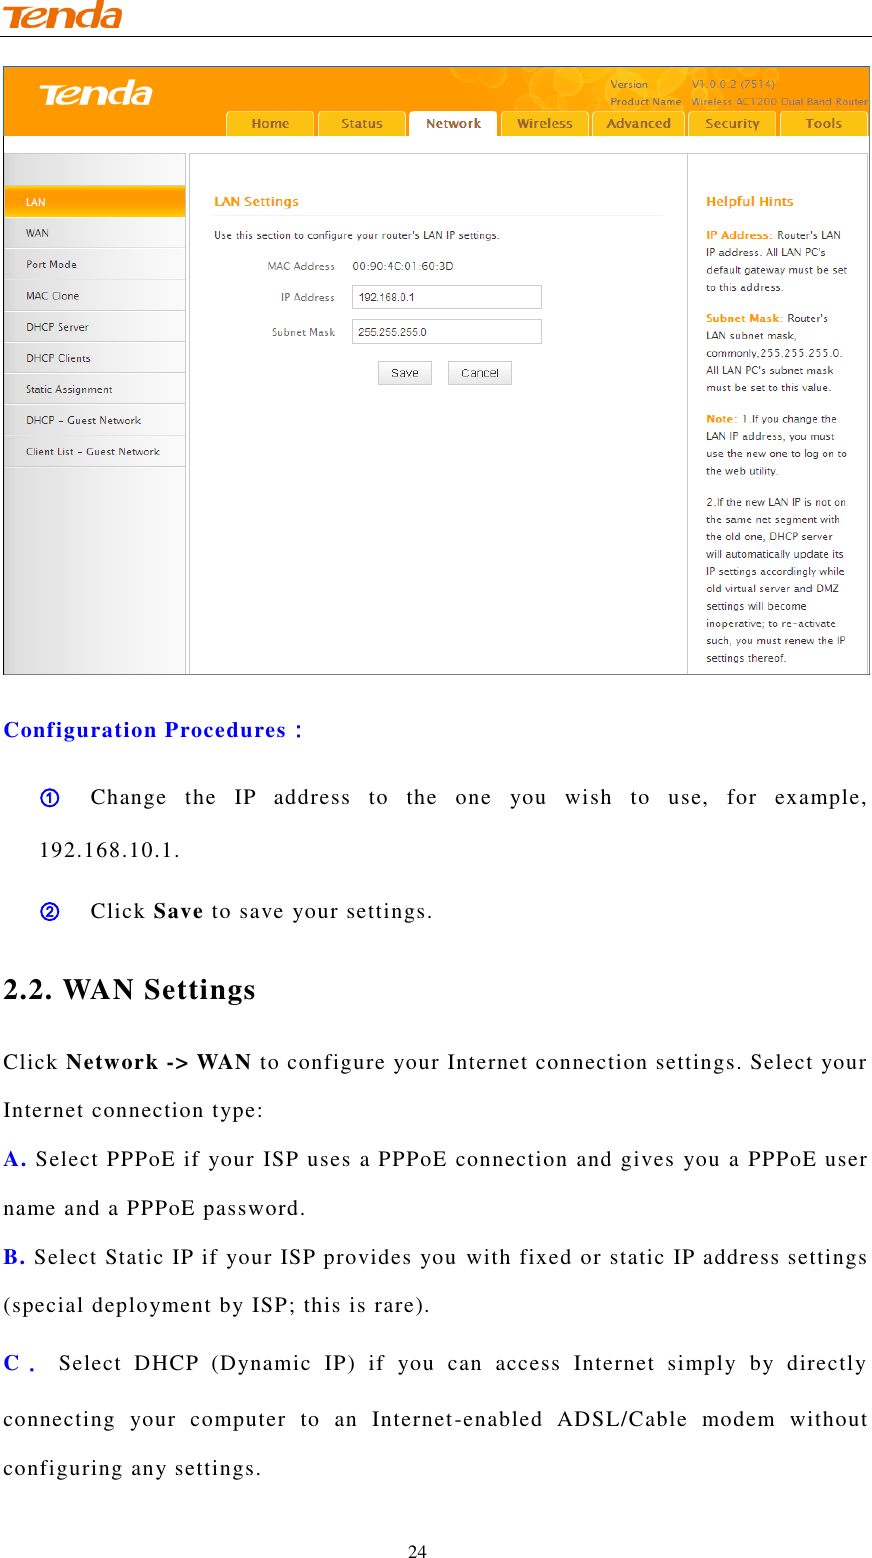                                    24  Configuration Procedures： ① Change  the  IP  address  to  the  one  you  wish  to  use,  for  example, 192.168.10.1. ② Click Save to save your settings. 2.2. WAN Settings Click Network -&gt; WAN to configure your Internet connection settings. Select your Internet connection type: A. Select PPPoE if your ISP uses a PPPoE connection and gives you a PPPoE user name and a PPPoE password. B. Select Static IP if your ISP provides you with fixed or static IP address settings (special deployment by ISP; this is rare). C． Select  DHCP  (Dynamic  IP)  if  you  can  access  Internet  simply  by  directly connecting  your  computer  to  an  Internet-enabled  ADSL/Cable  modem  without configuring any settings. 